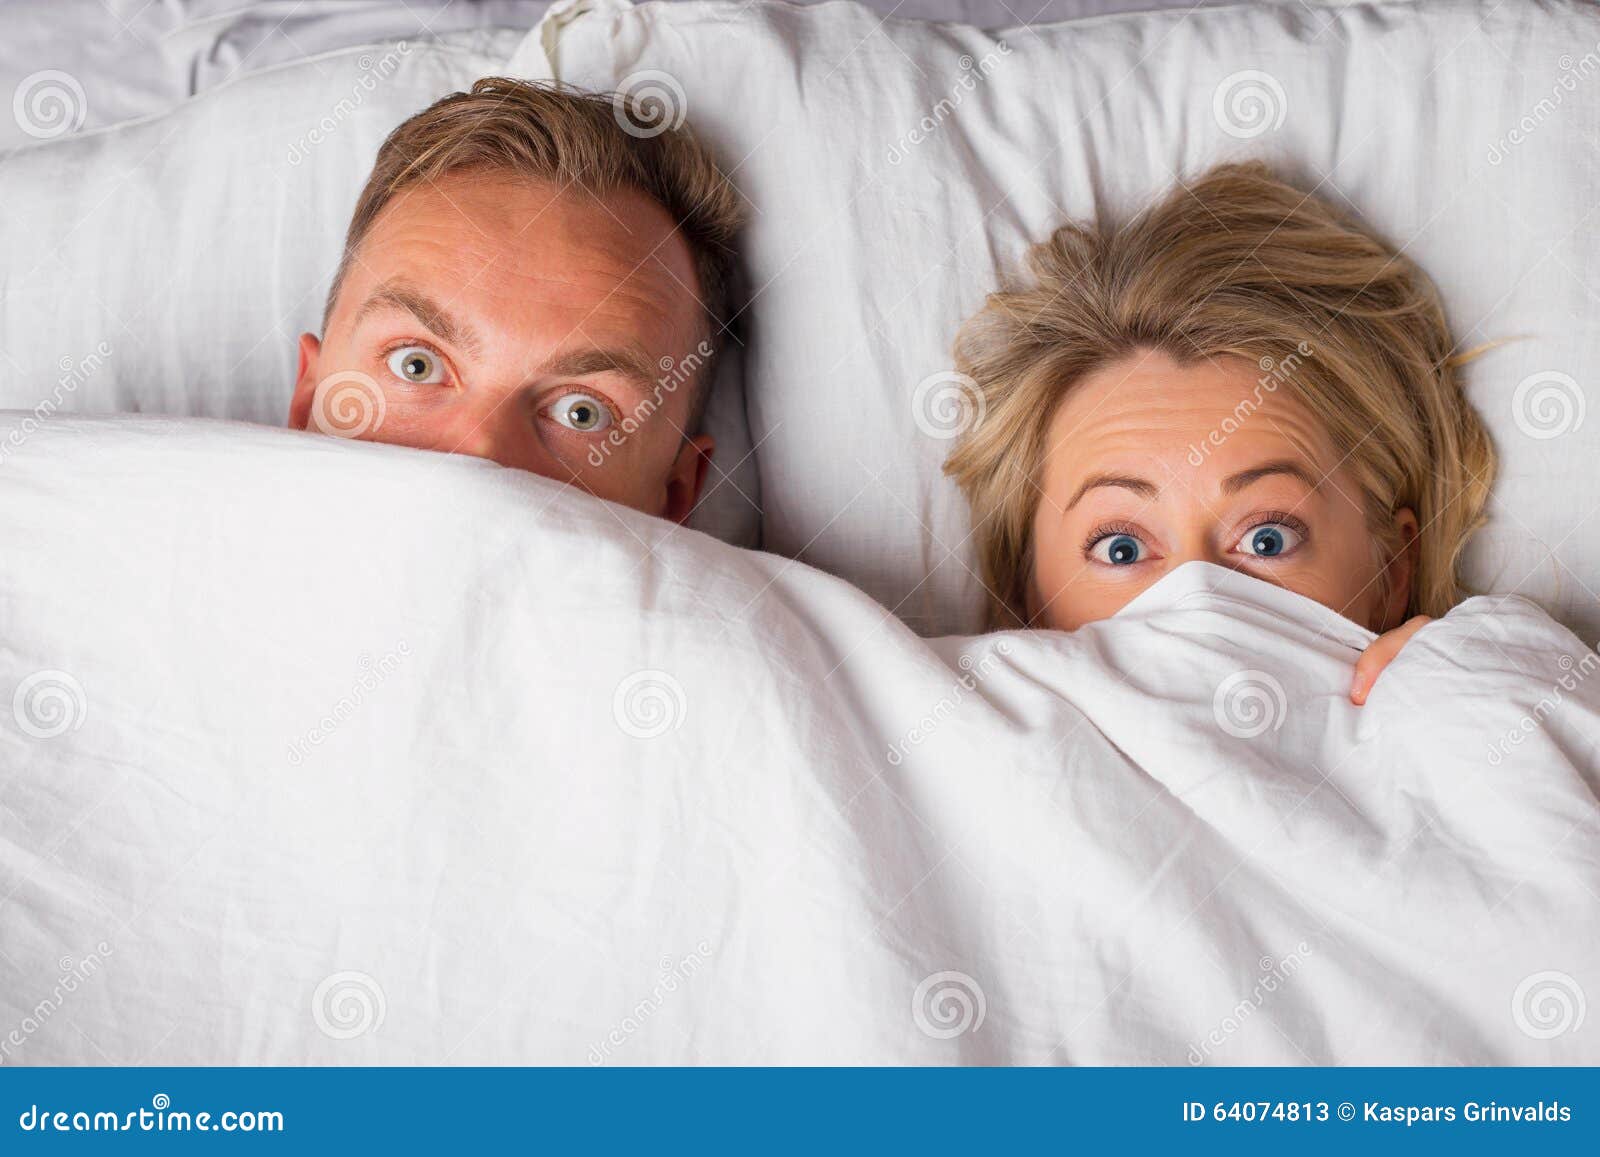 Couple Hiding Under Sheets Stock Image Image Of Con